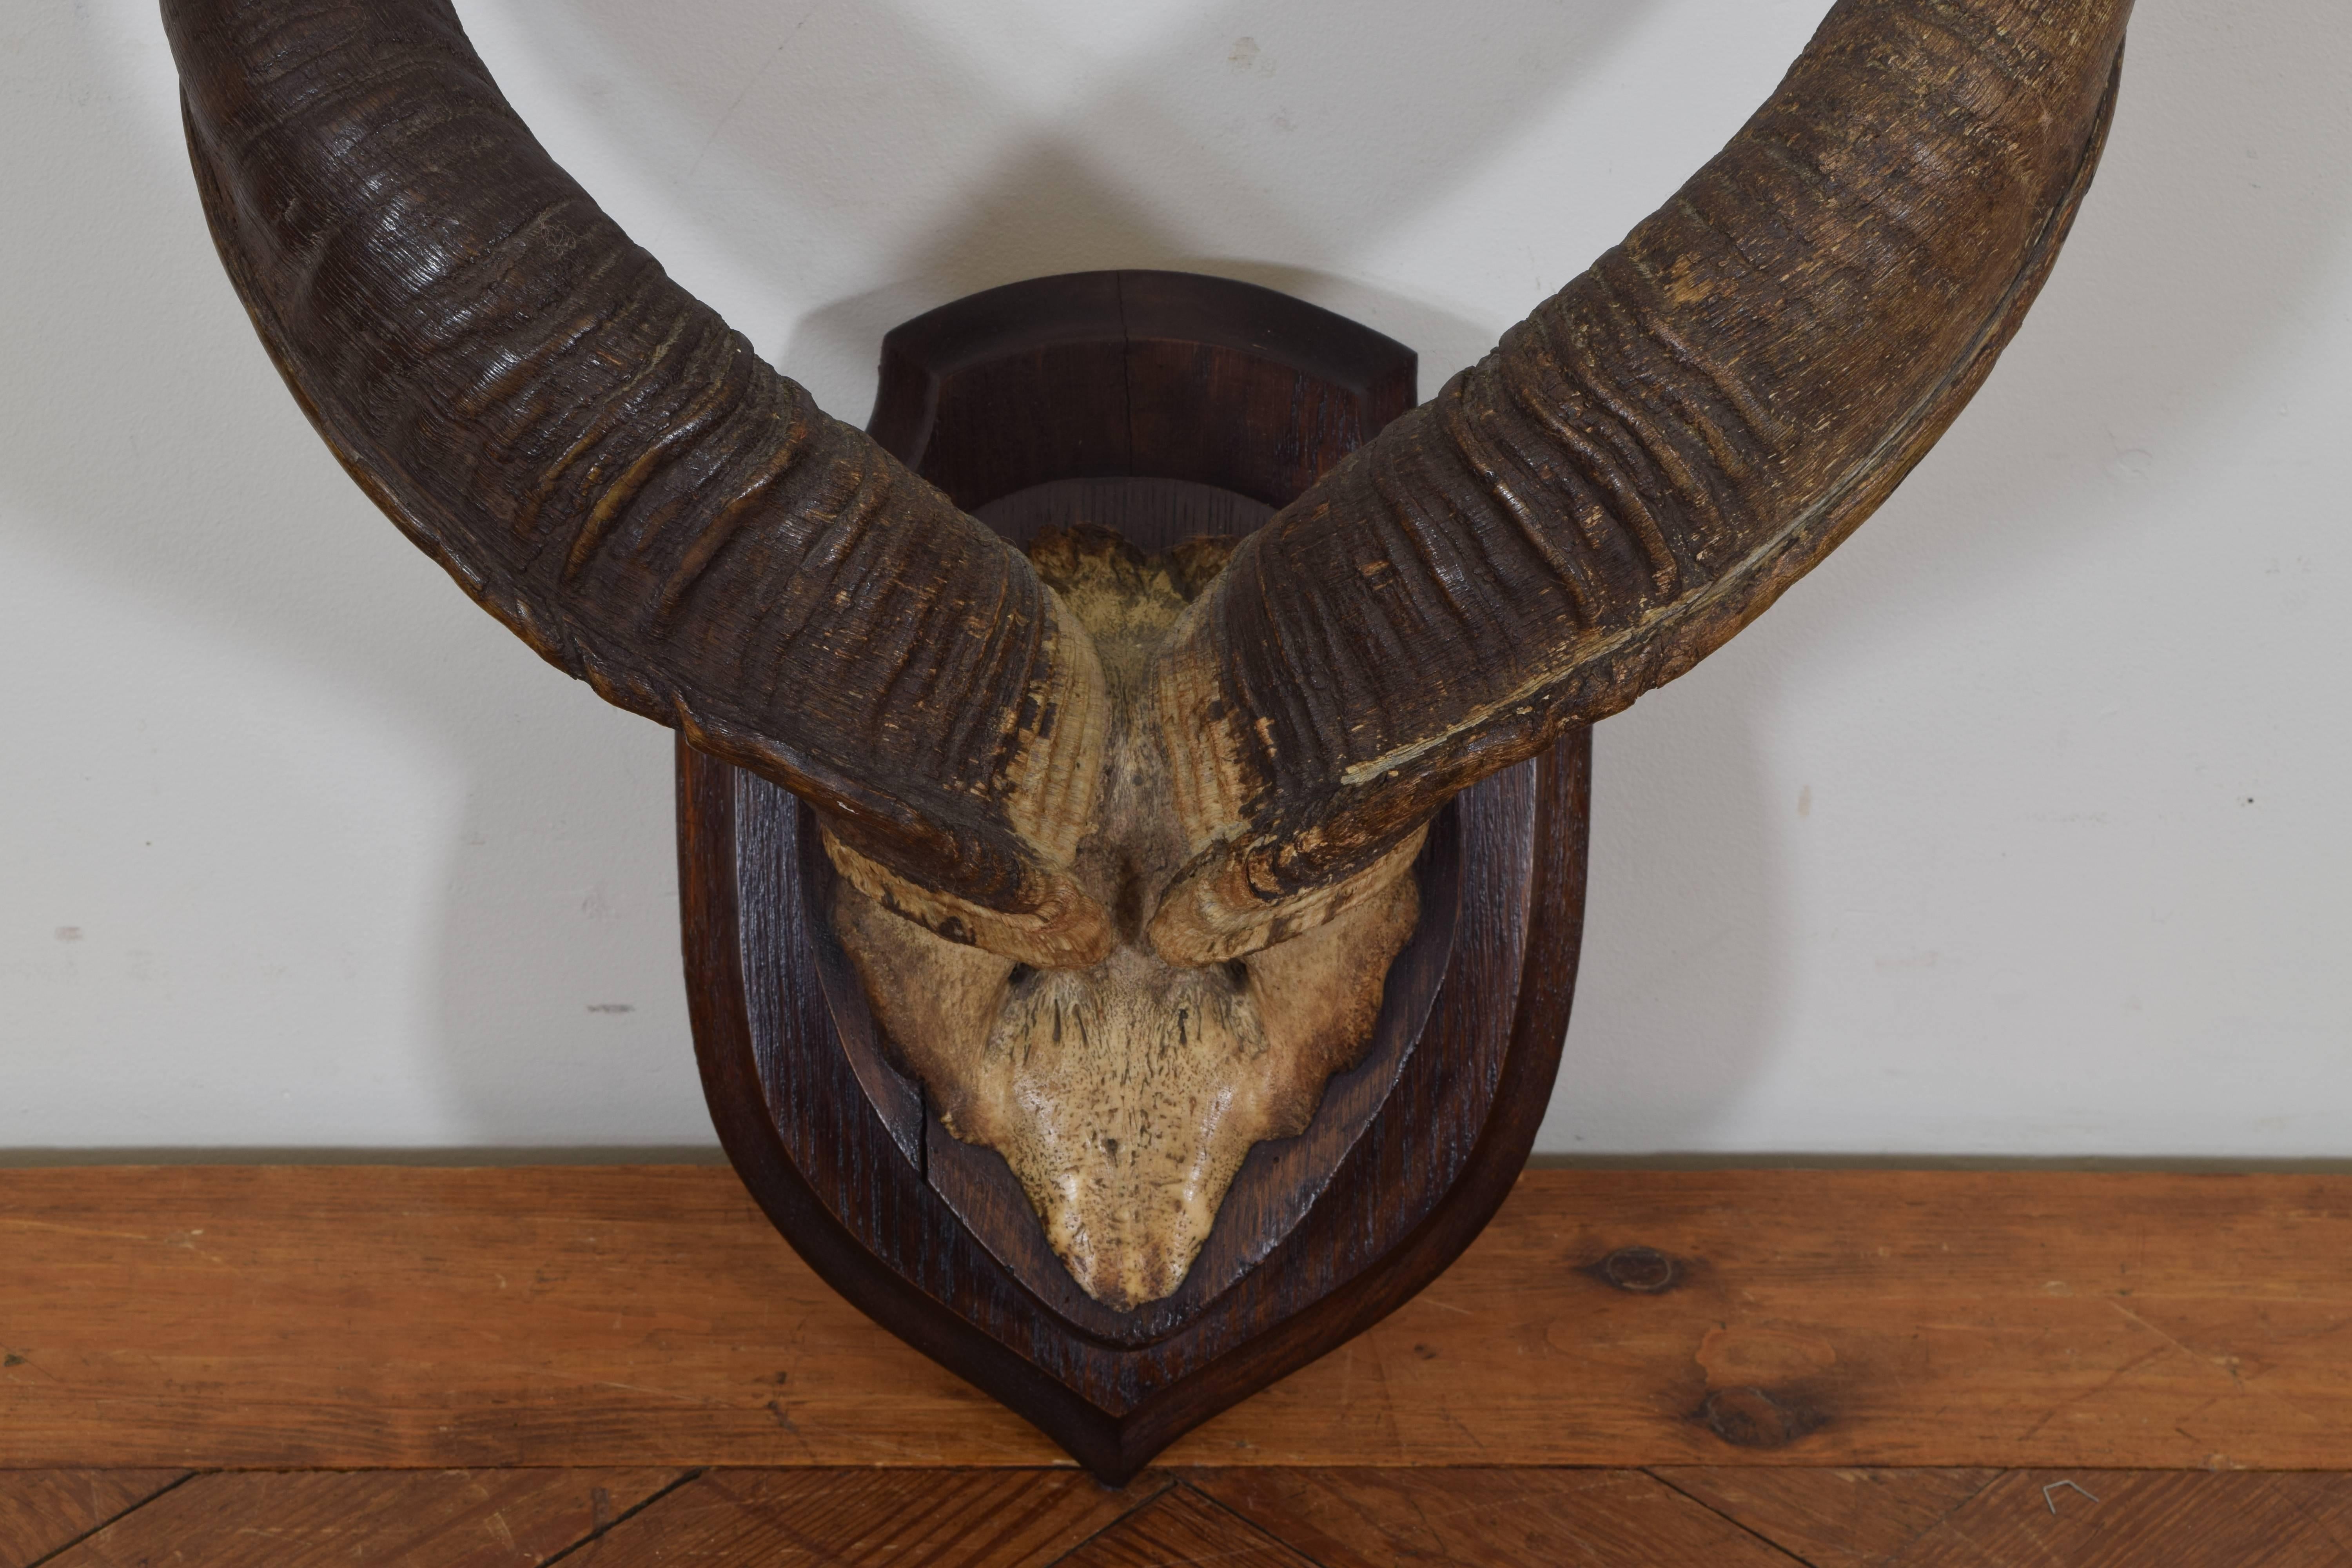 The upper section of the skull mounted on an oak backplate with a molded edge.